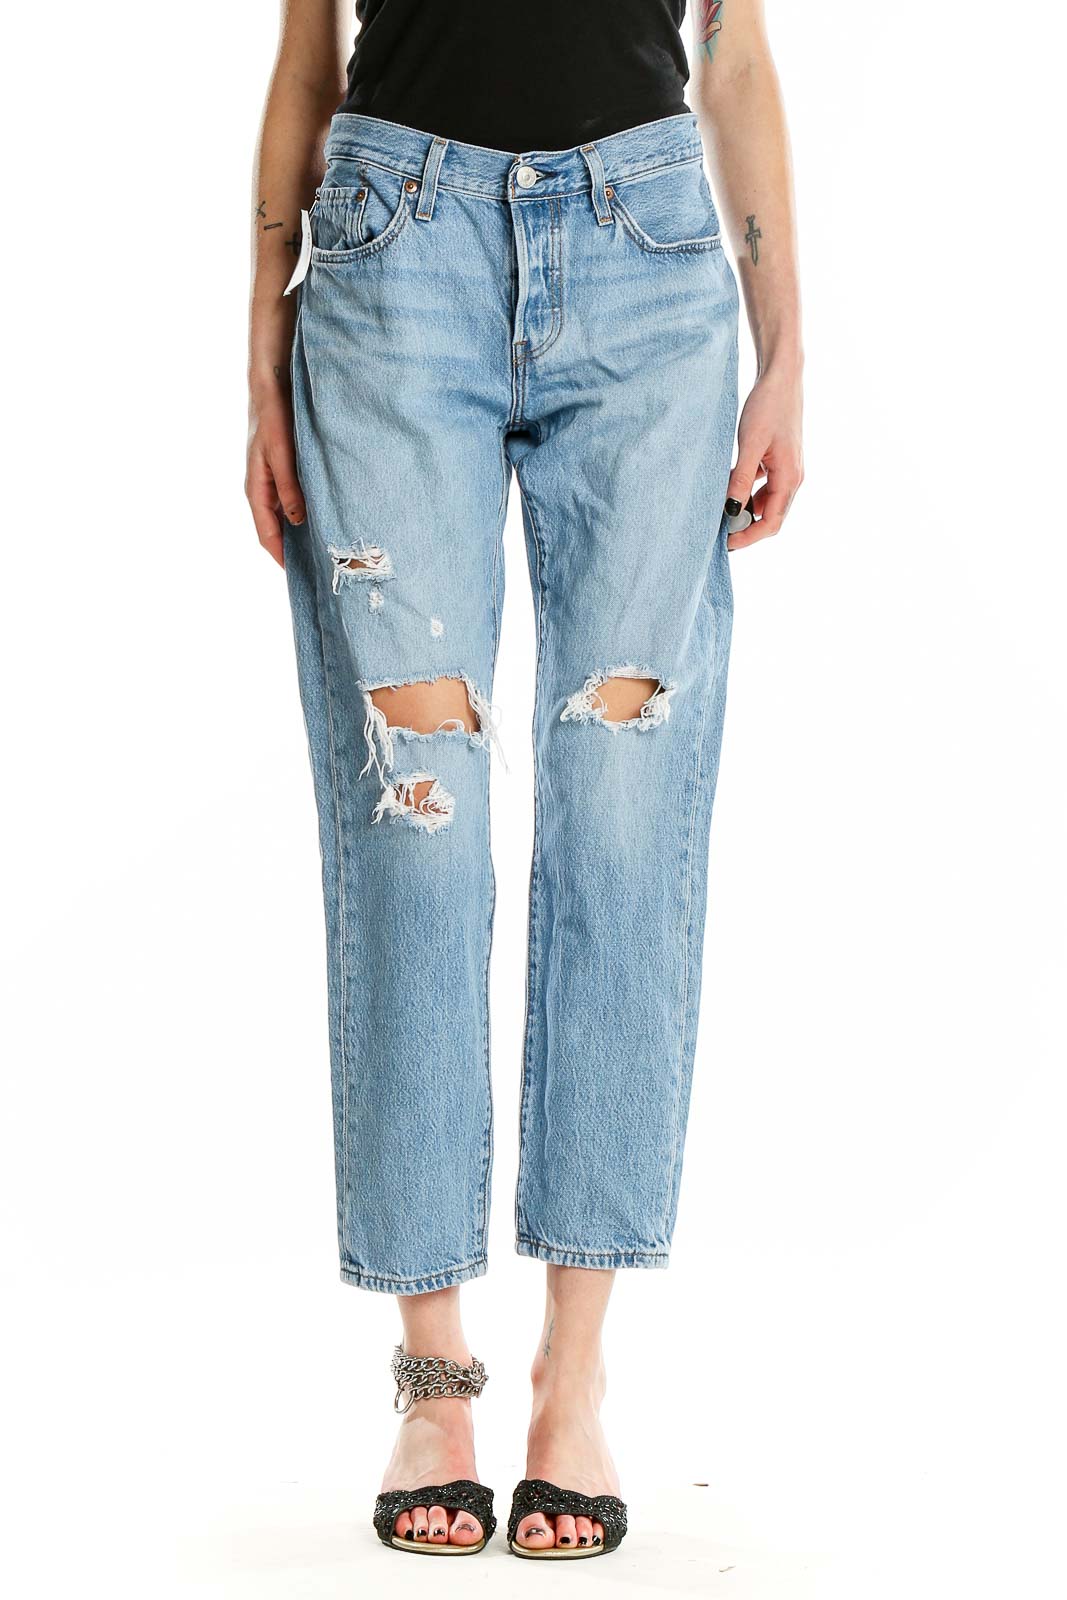 Blue Light Rinse Distressed Ripped Jeans Front